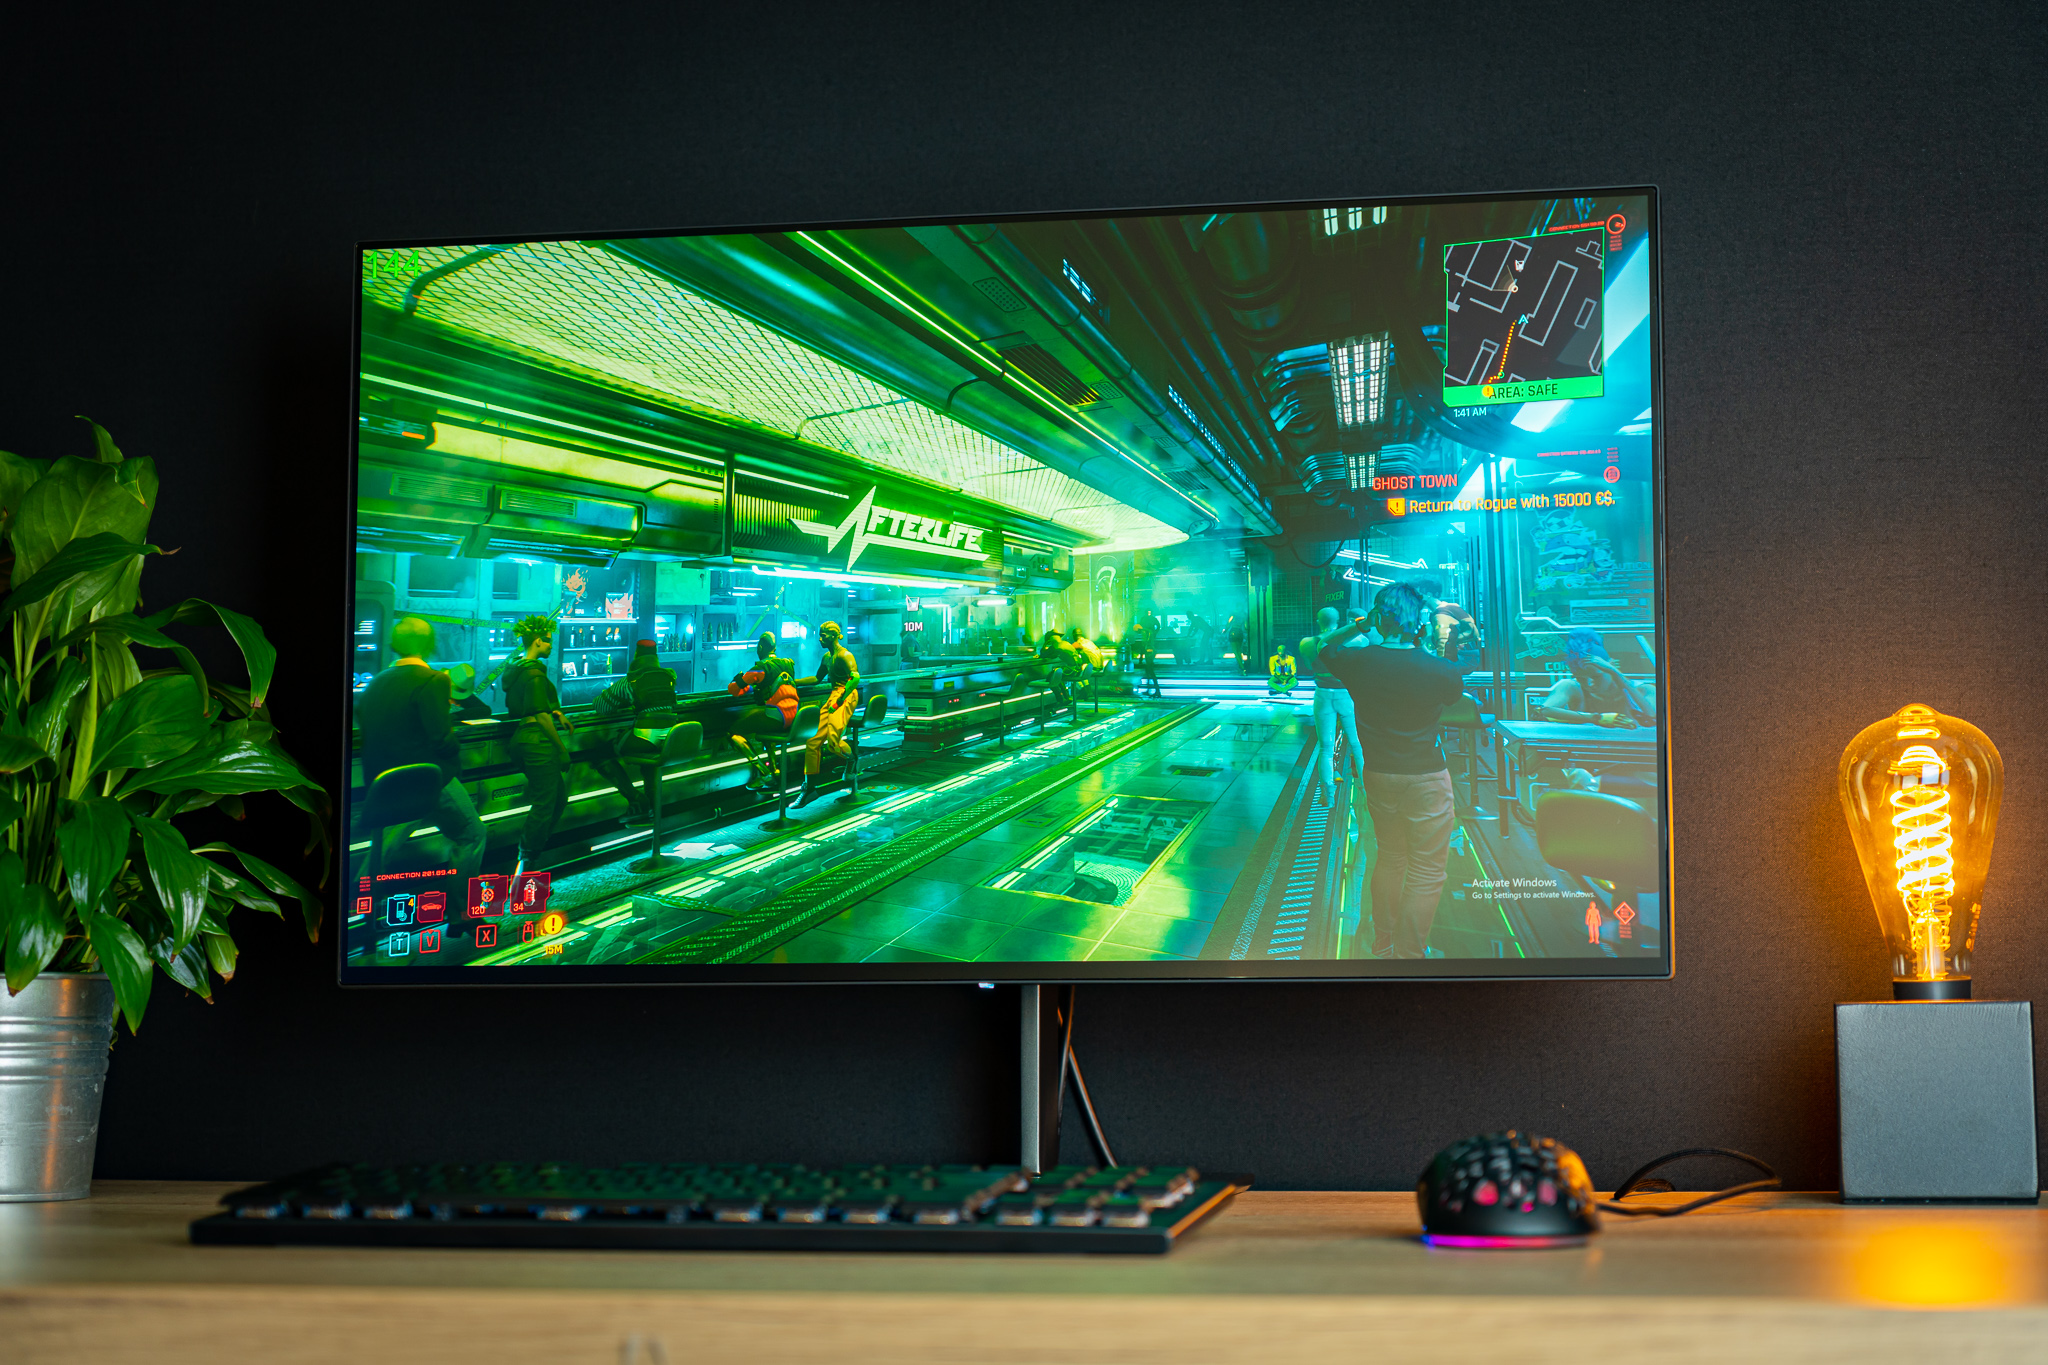 ROG's first DisplayPort 2.1 monitor takes 4K gaming to new heights